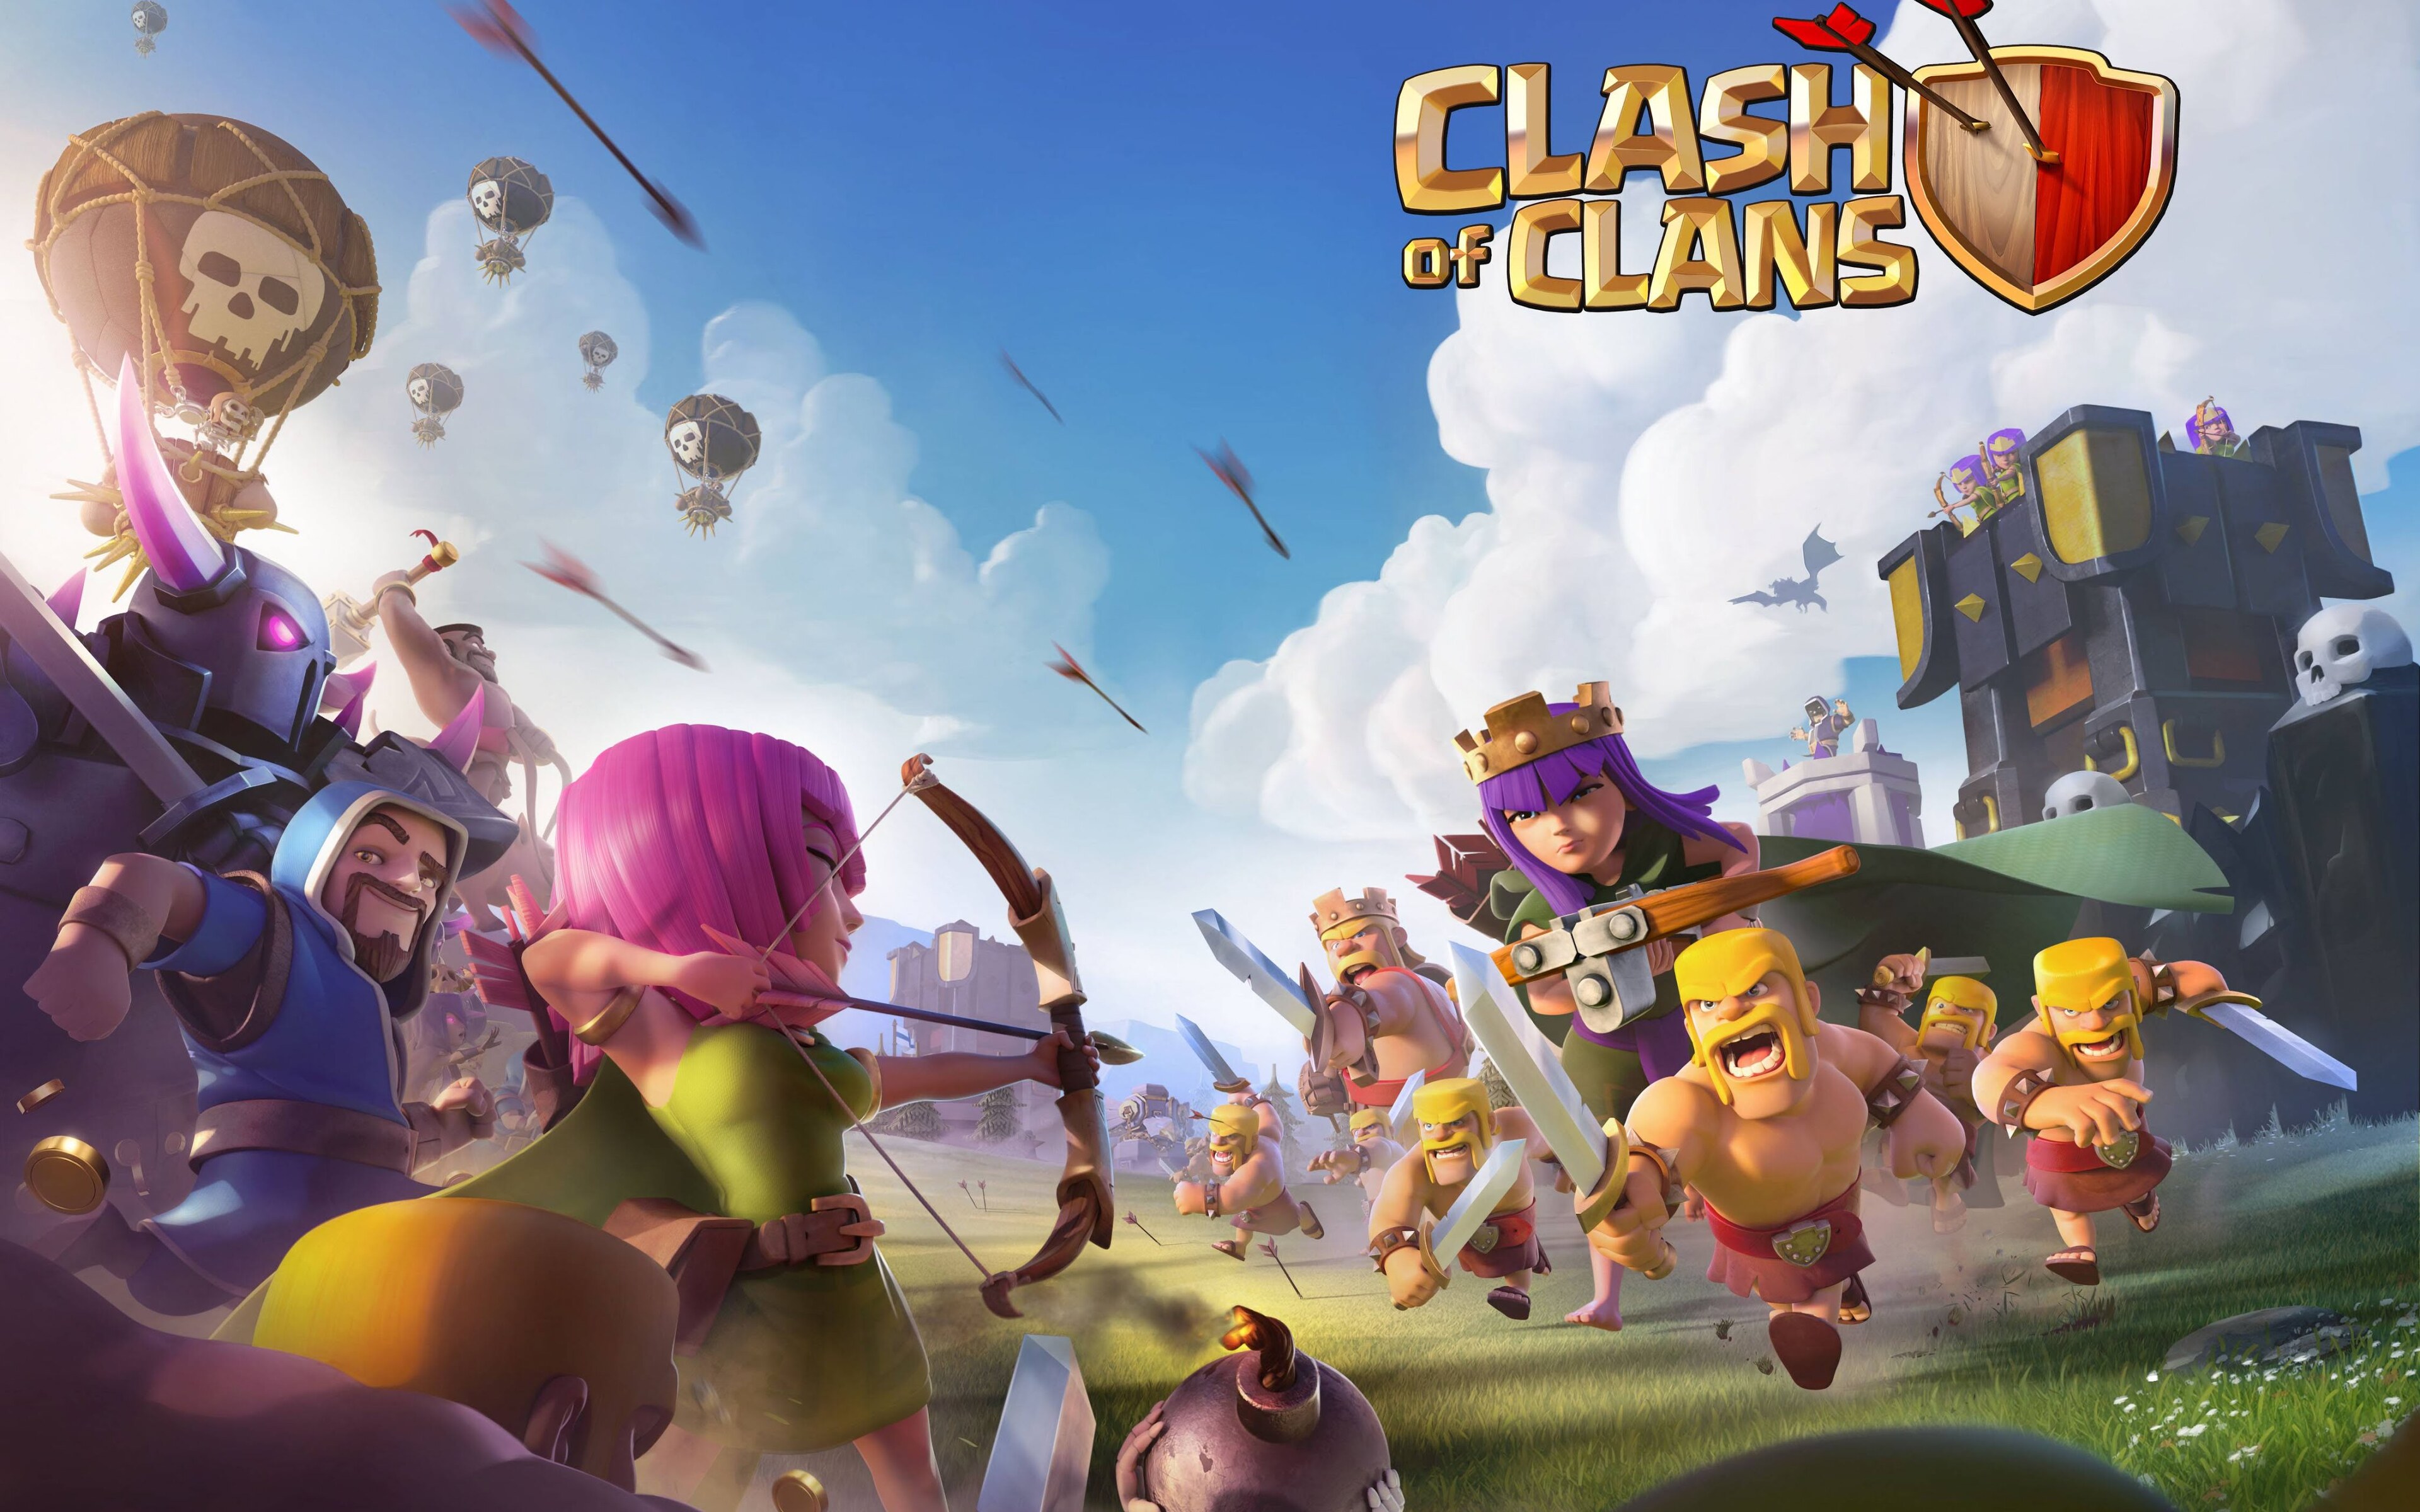 Clash Of Clans 2017 In 3840x2400 Resolution. clash-of-clans-2017-new.jpg. 